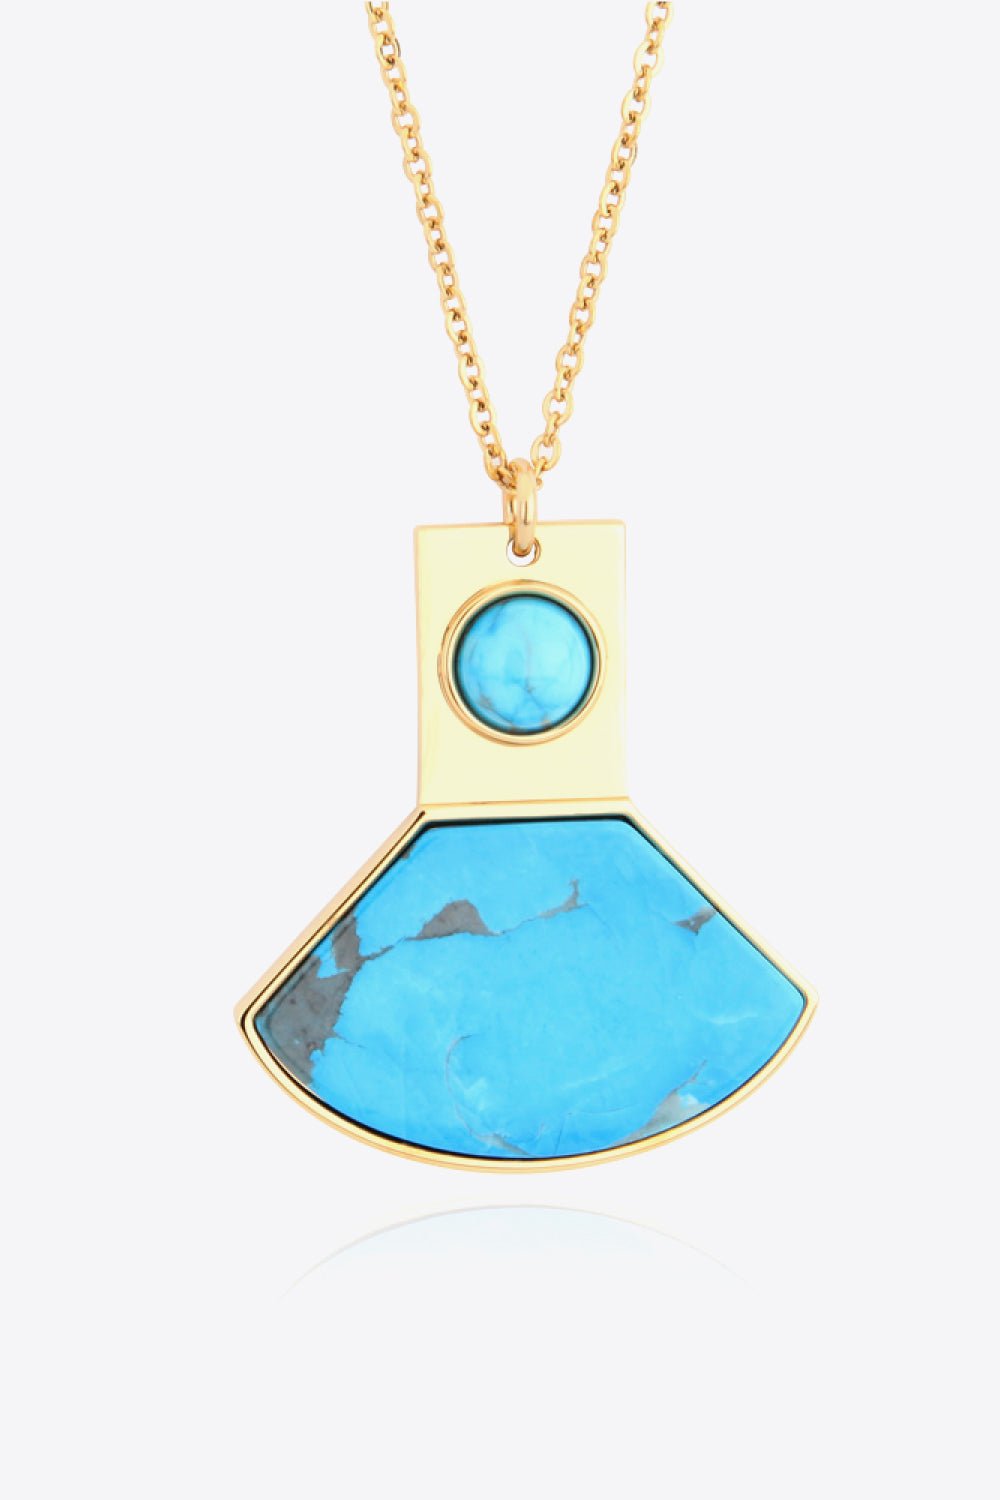 18K Gold Plated Turquoise Pendant Necklace - Shah S. Sahota